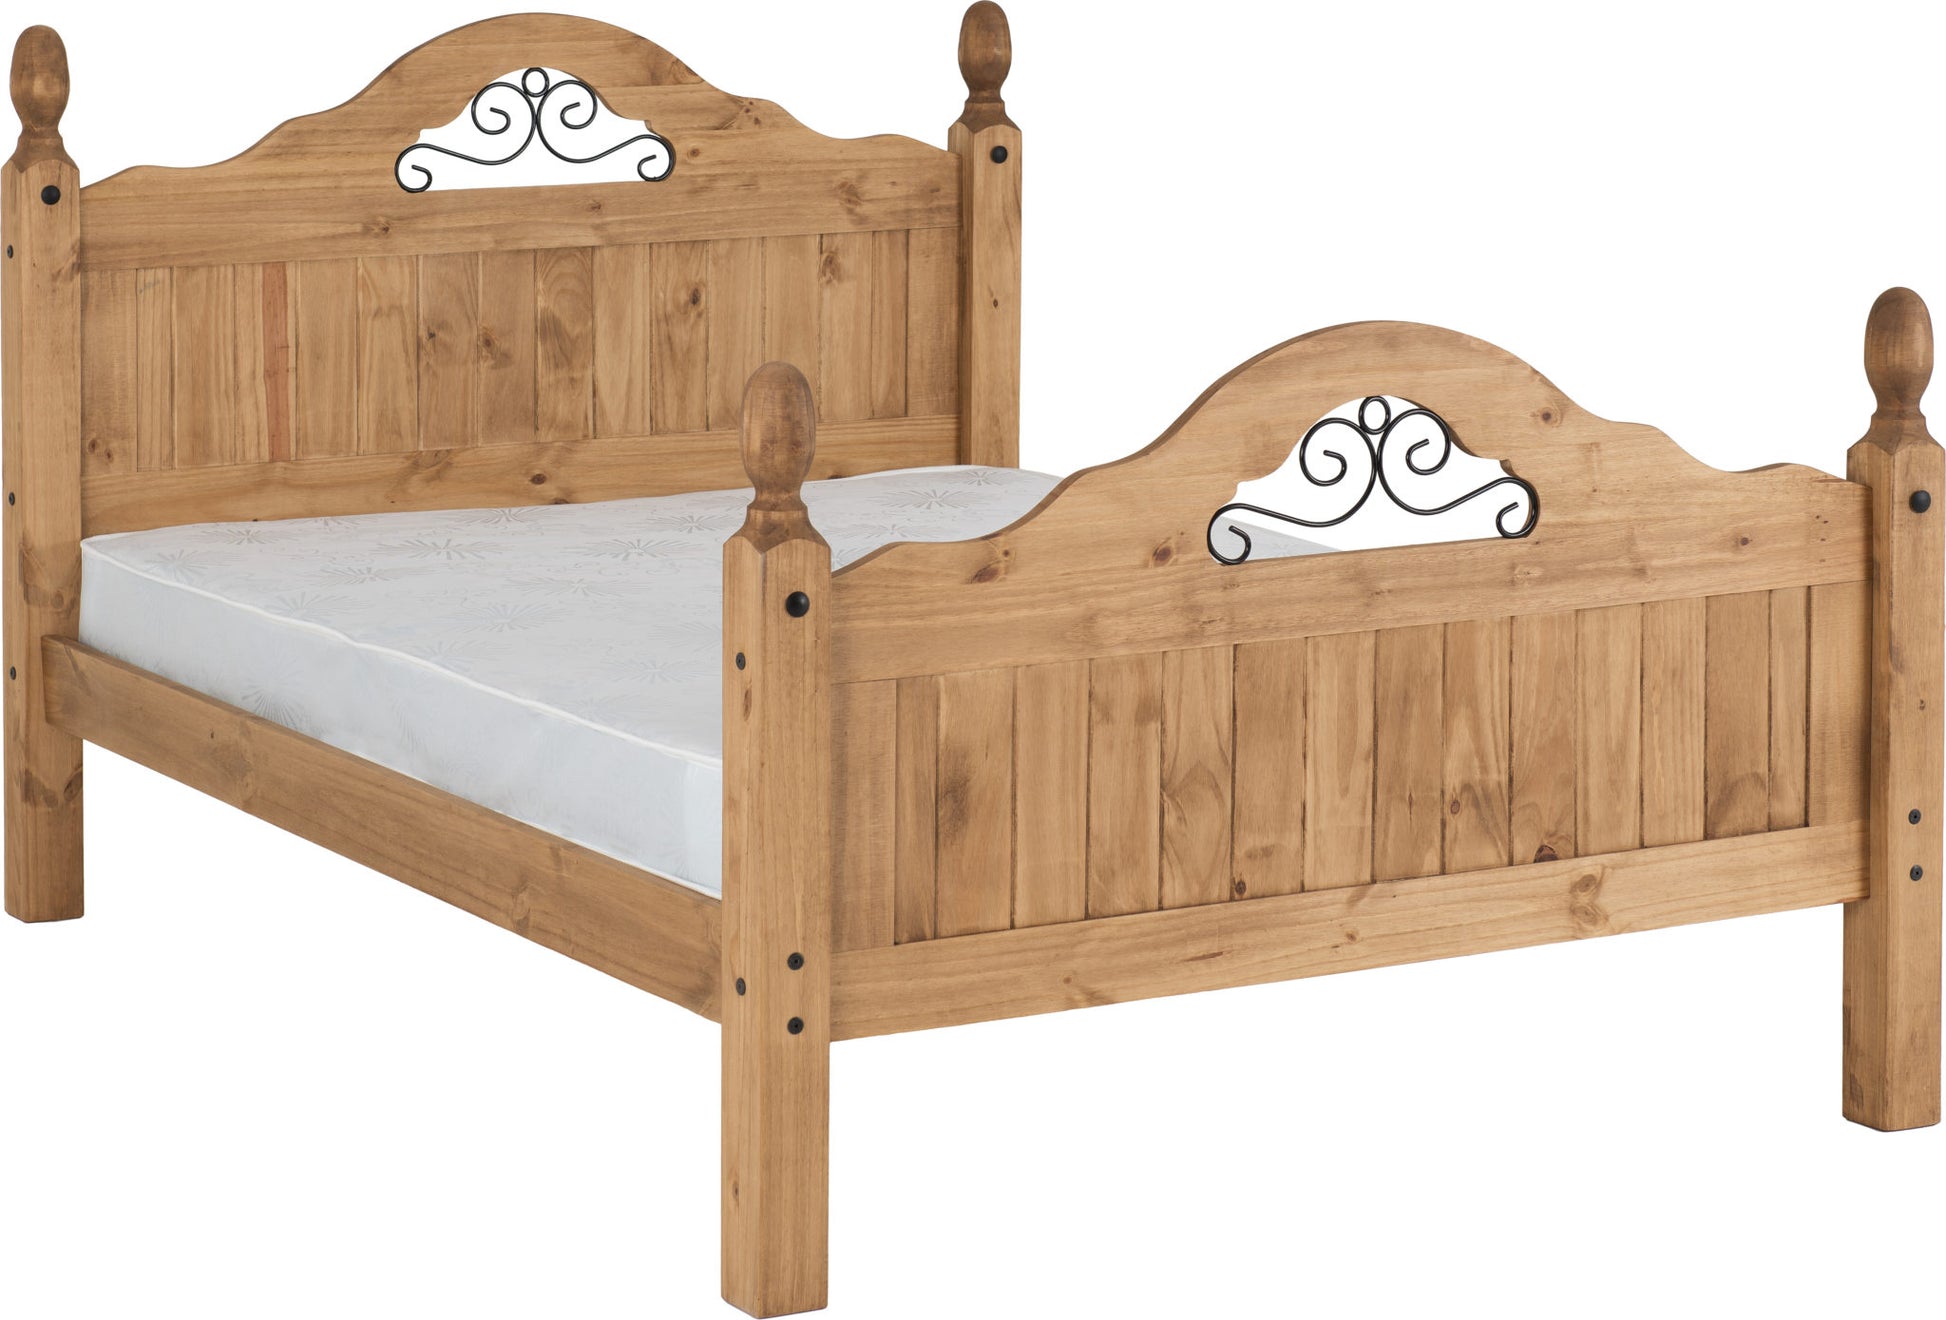 Corona Scroll 4'6"  Double Bed High Foot End- Distressed Waxed Pine